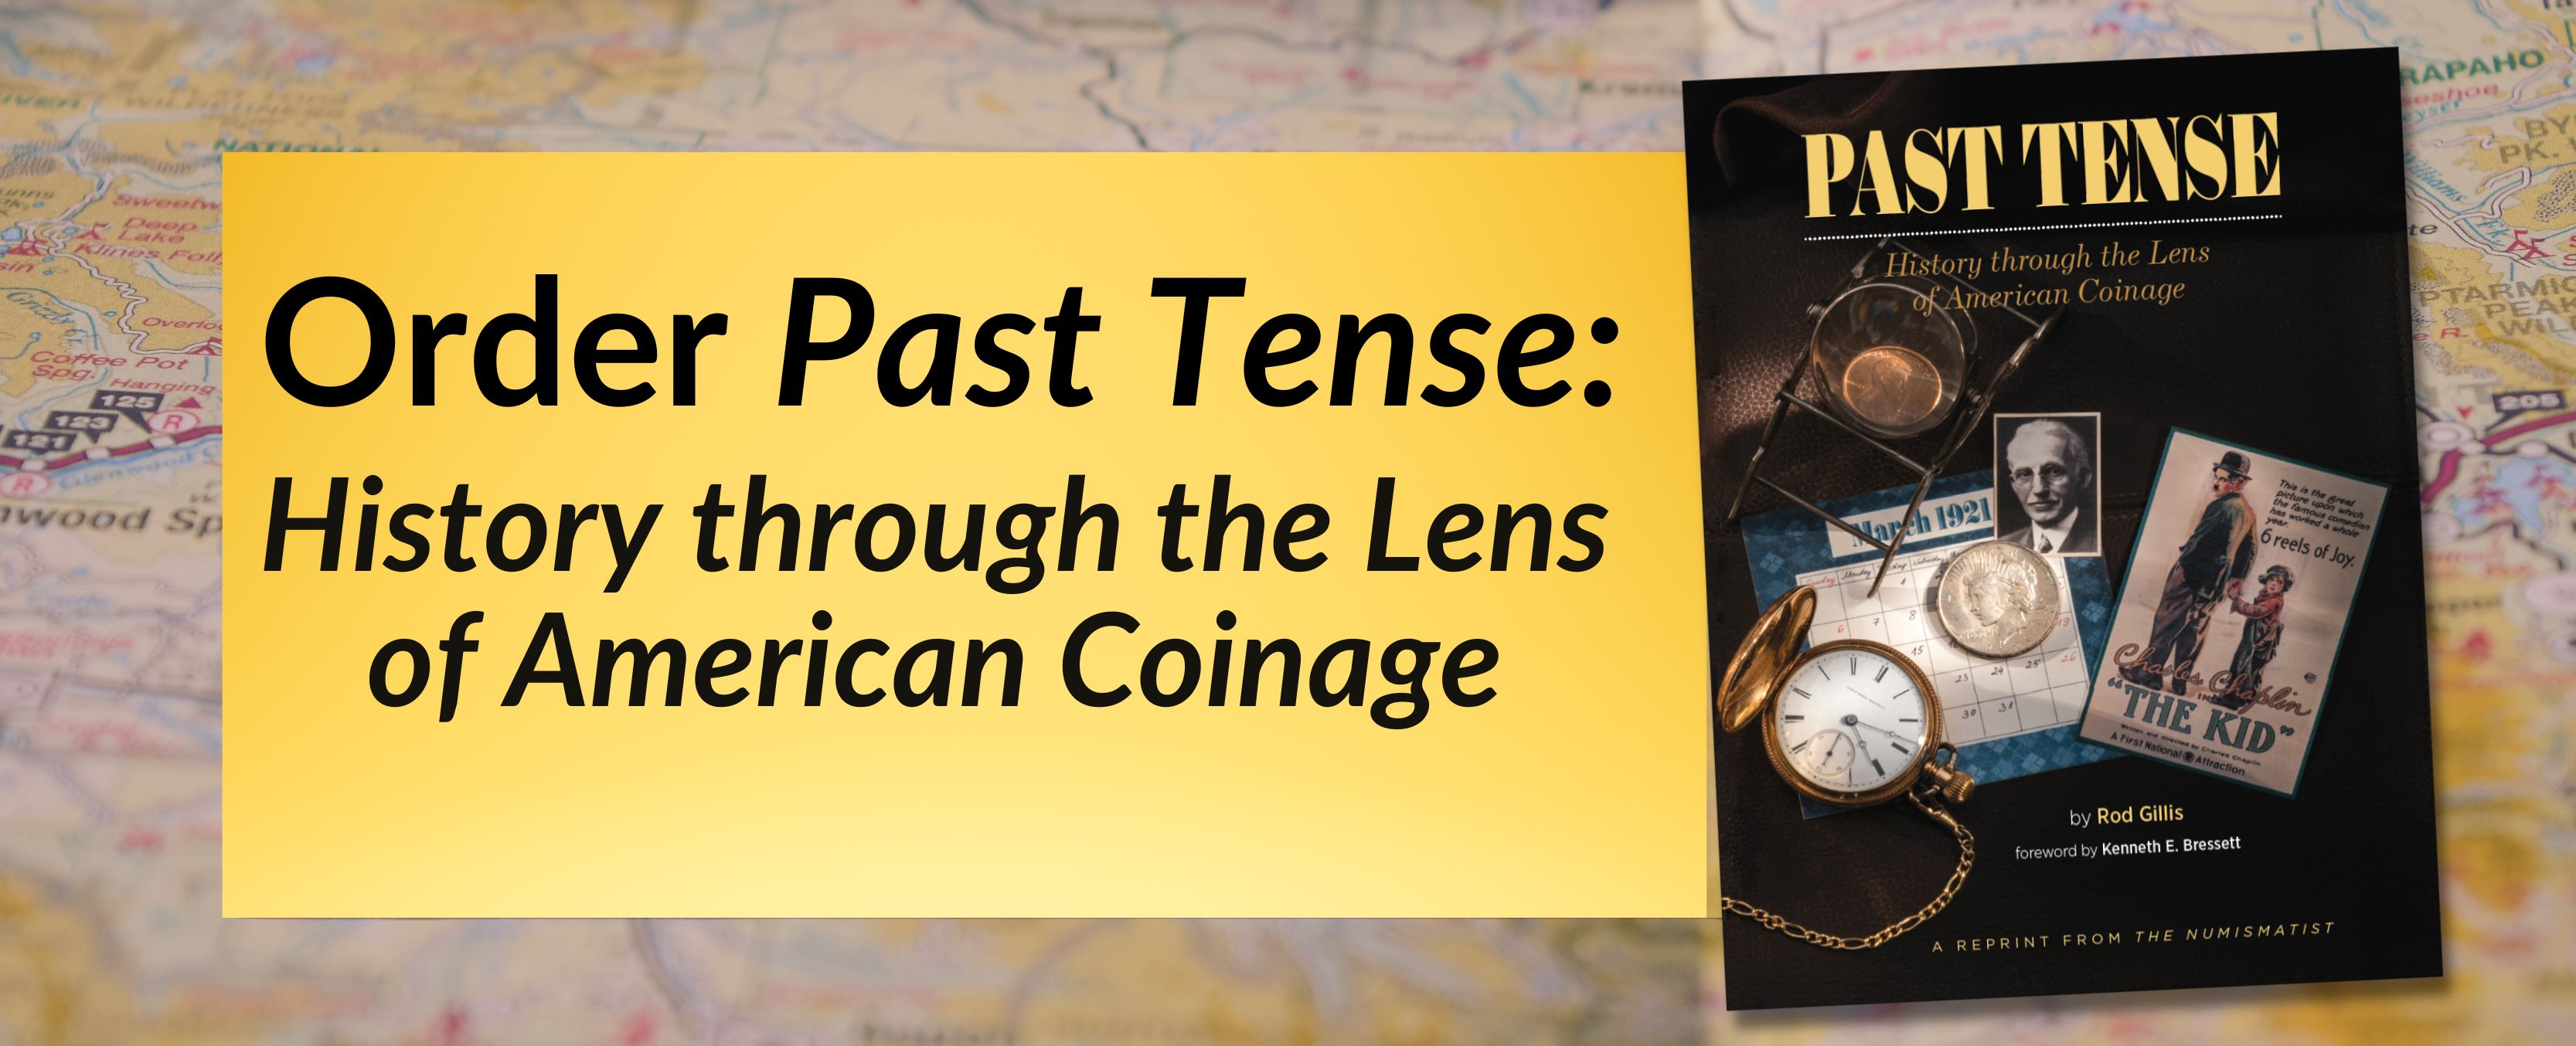 Order Past Tense_ History through the Lens of American Coinage Banner